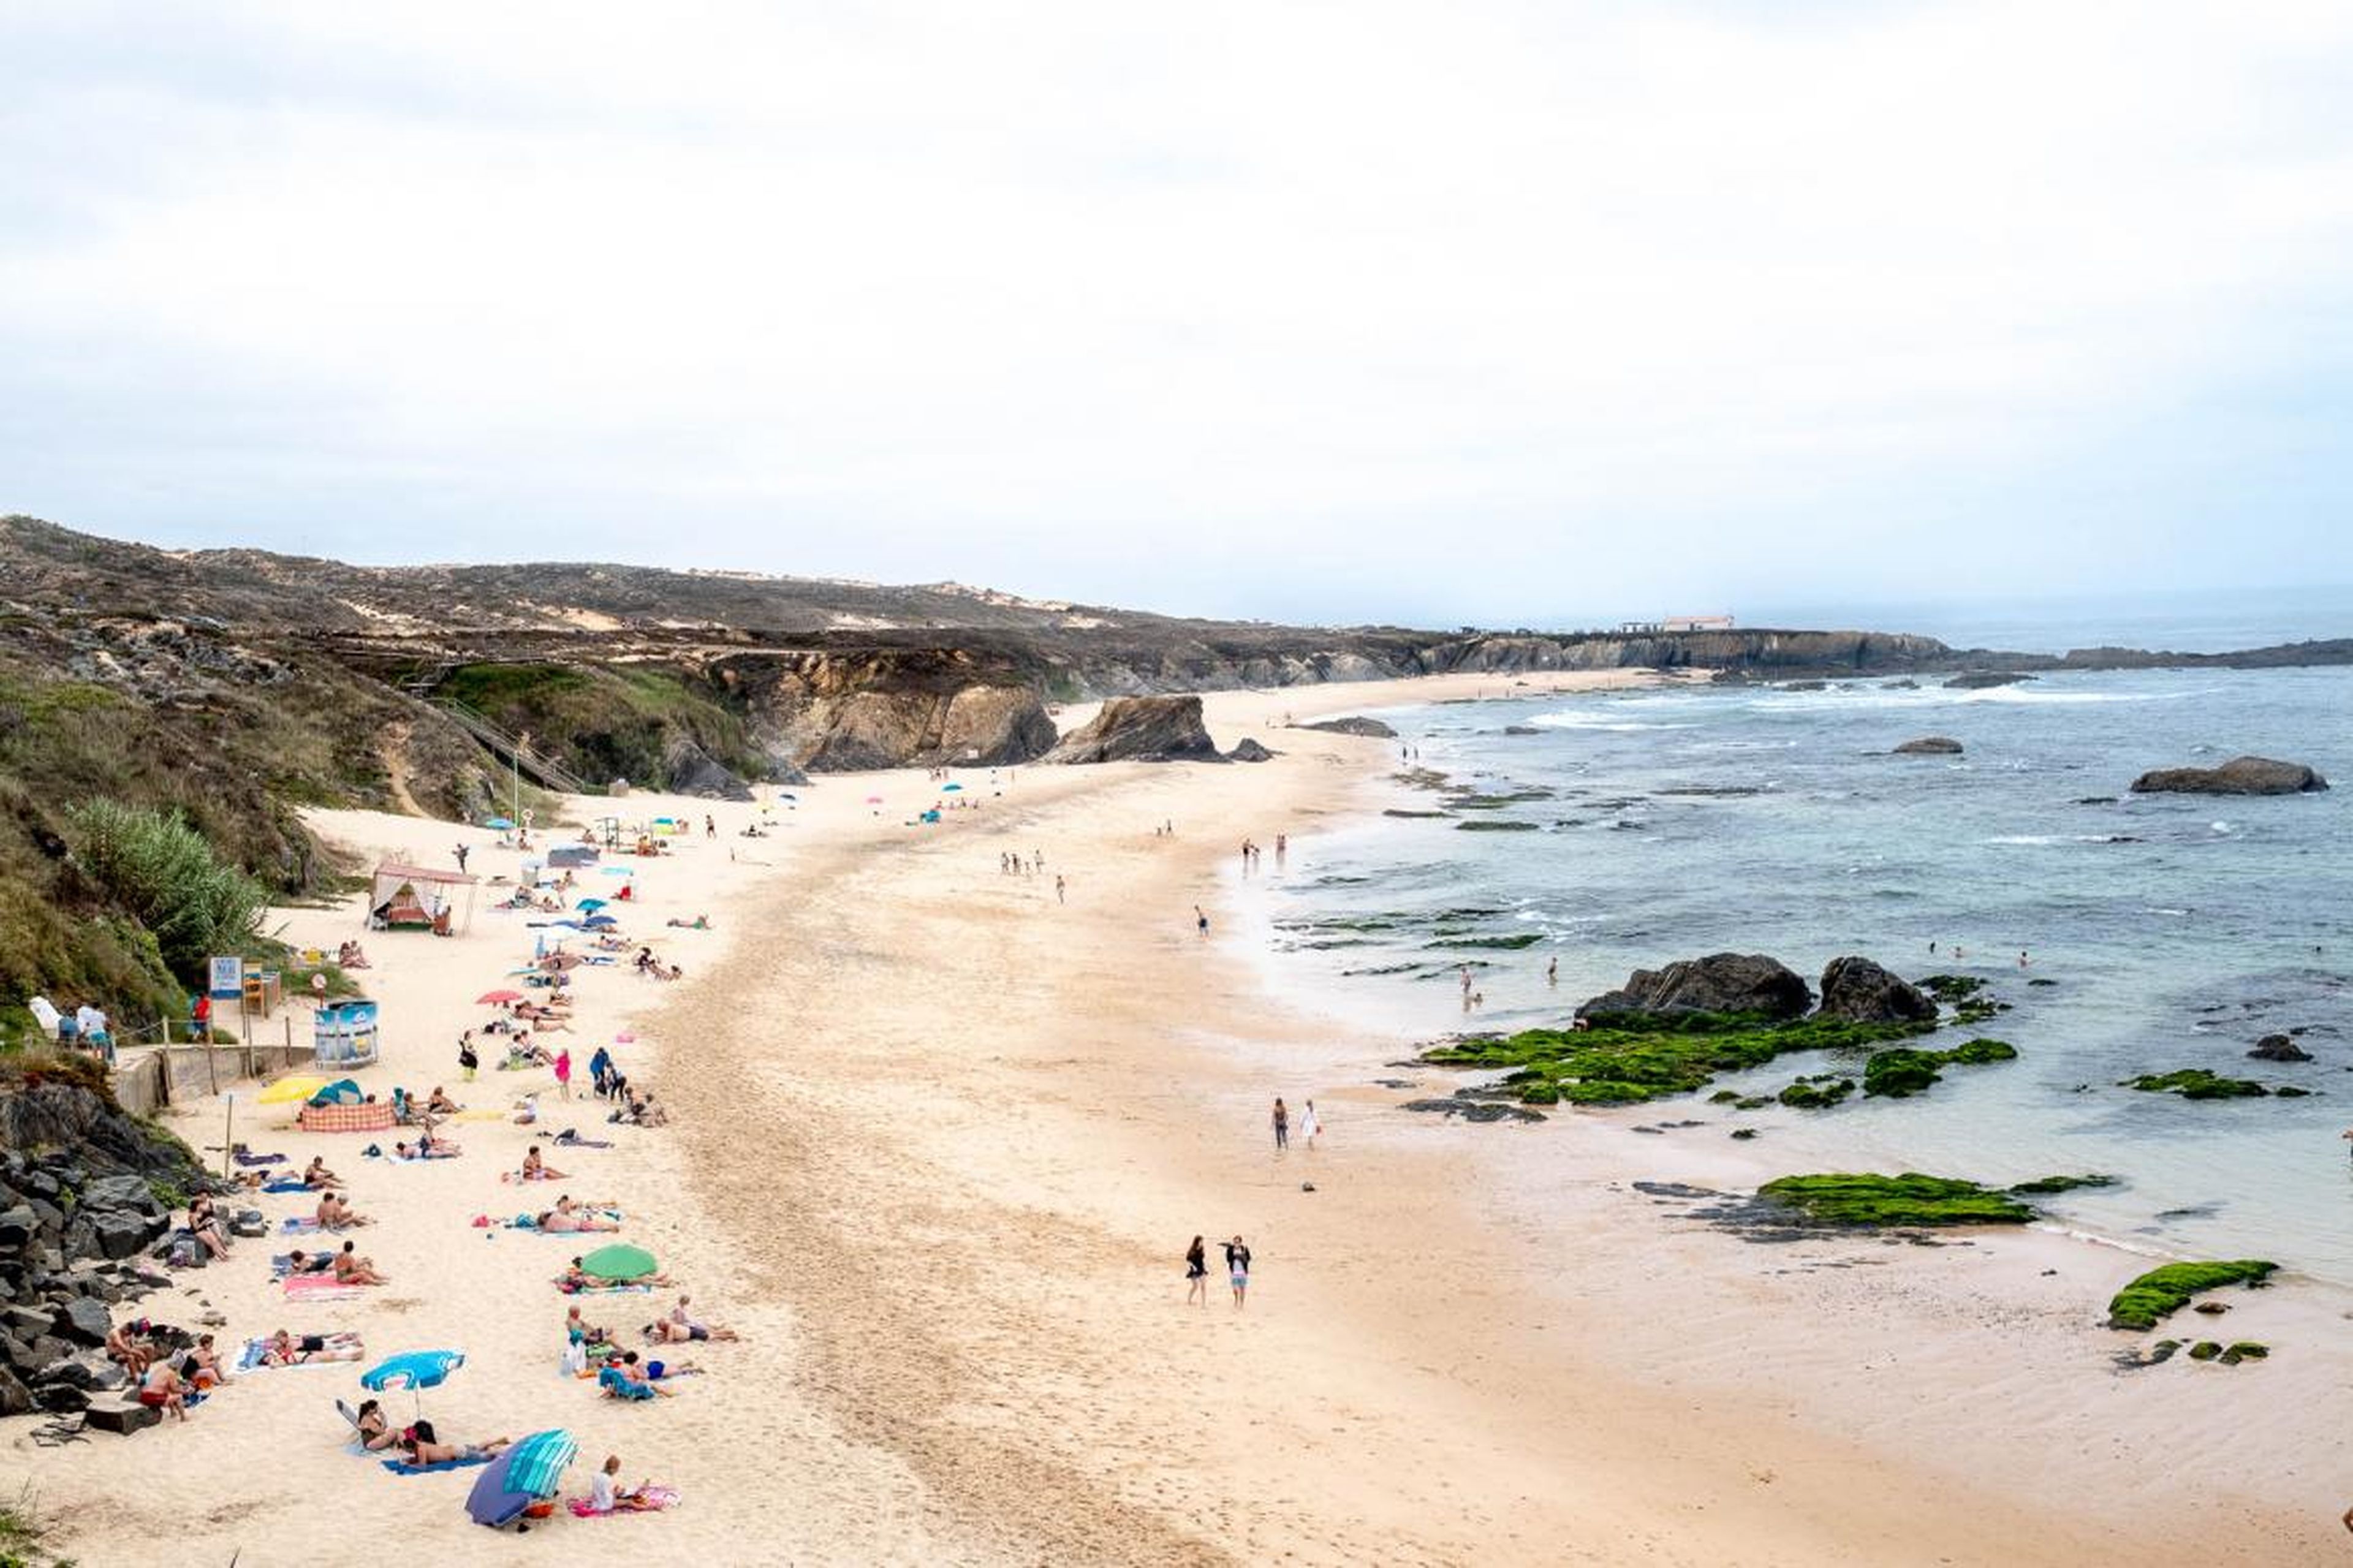 My favorite beaches were the wild ones in Alentejo. The small submerged rocks teem with sea life. But the Atlantic Ocean water is brisk, even during the summer.